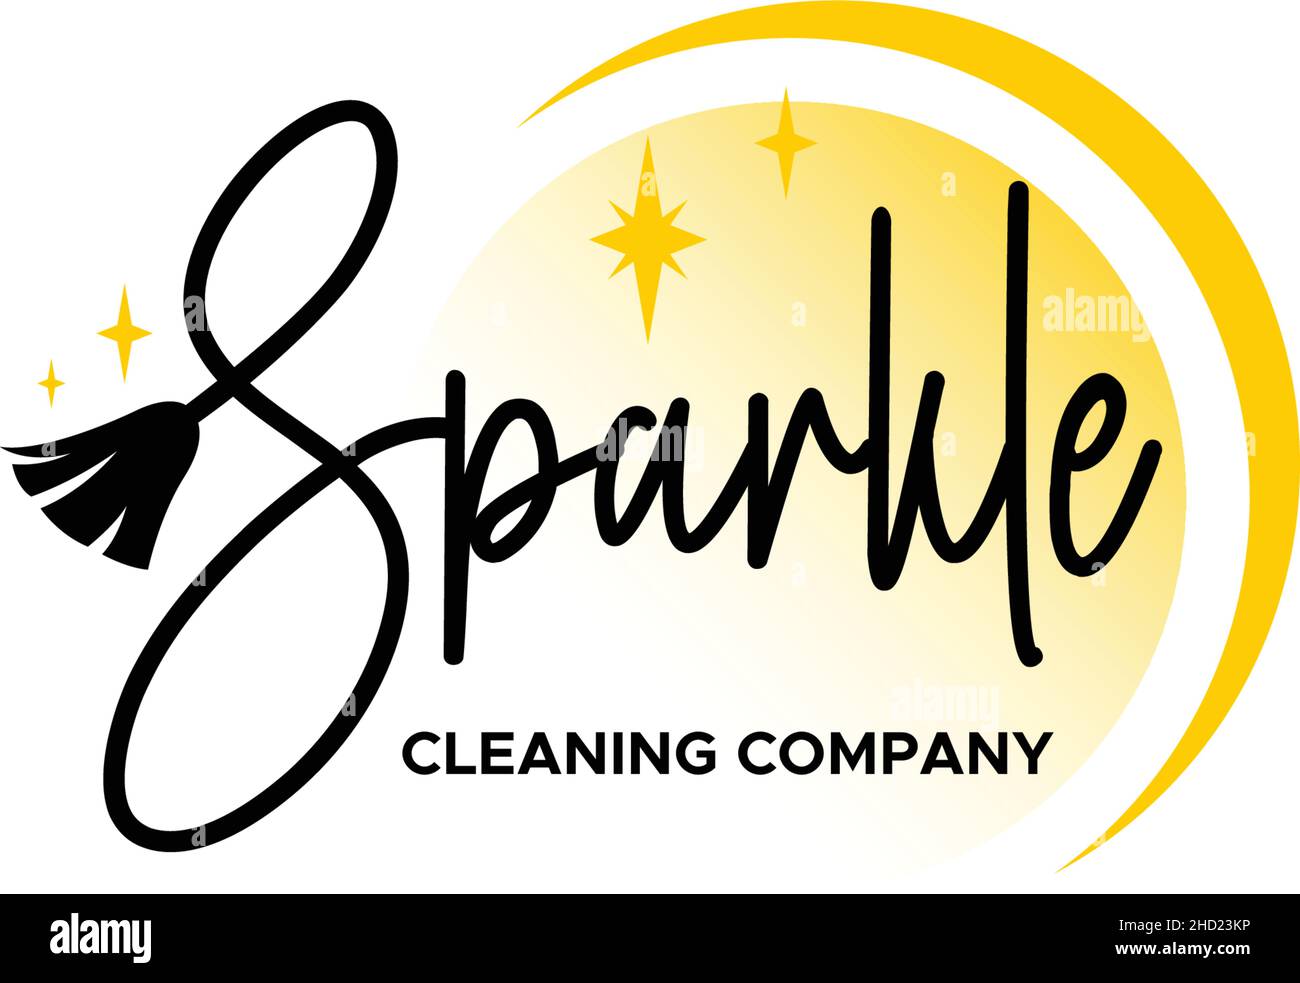 Flat colorful SPARKLE CLEANING COMPANY logo design Stock Vector